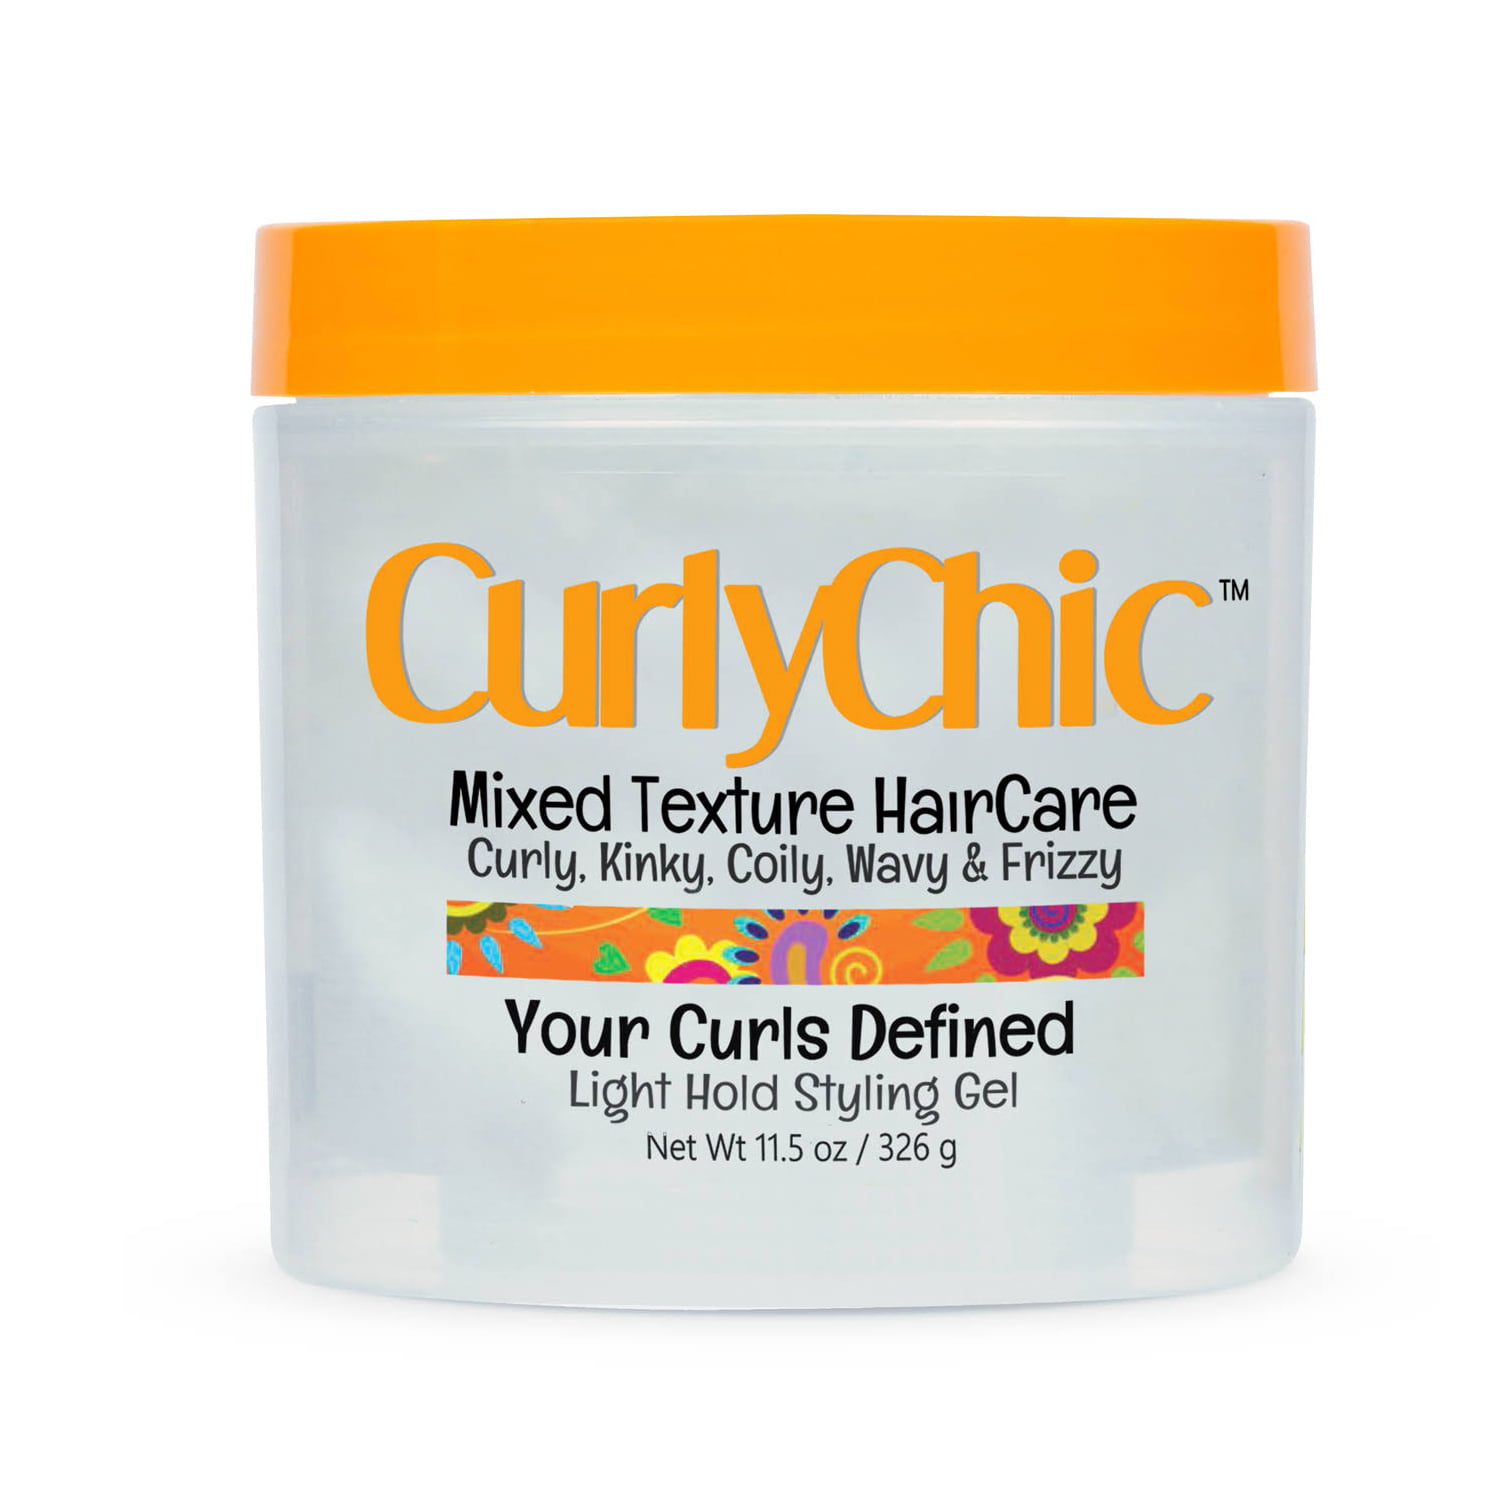 Curly Chic Mixed Haircare Your Curls Defined, 11.5 Oz. - Walmart.com